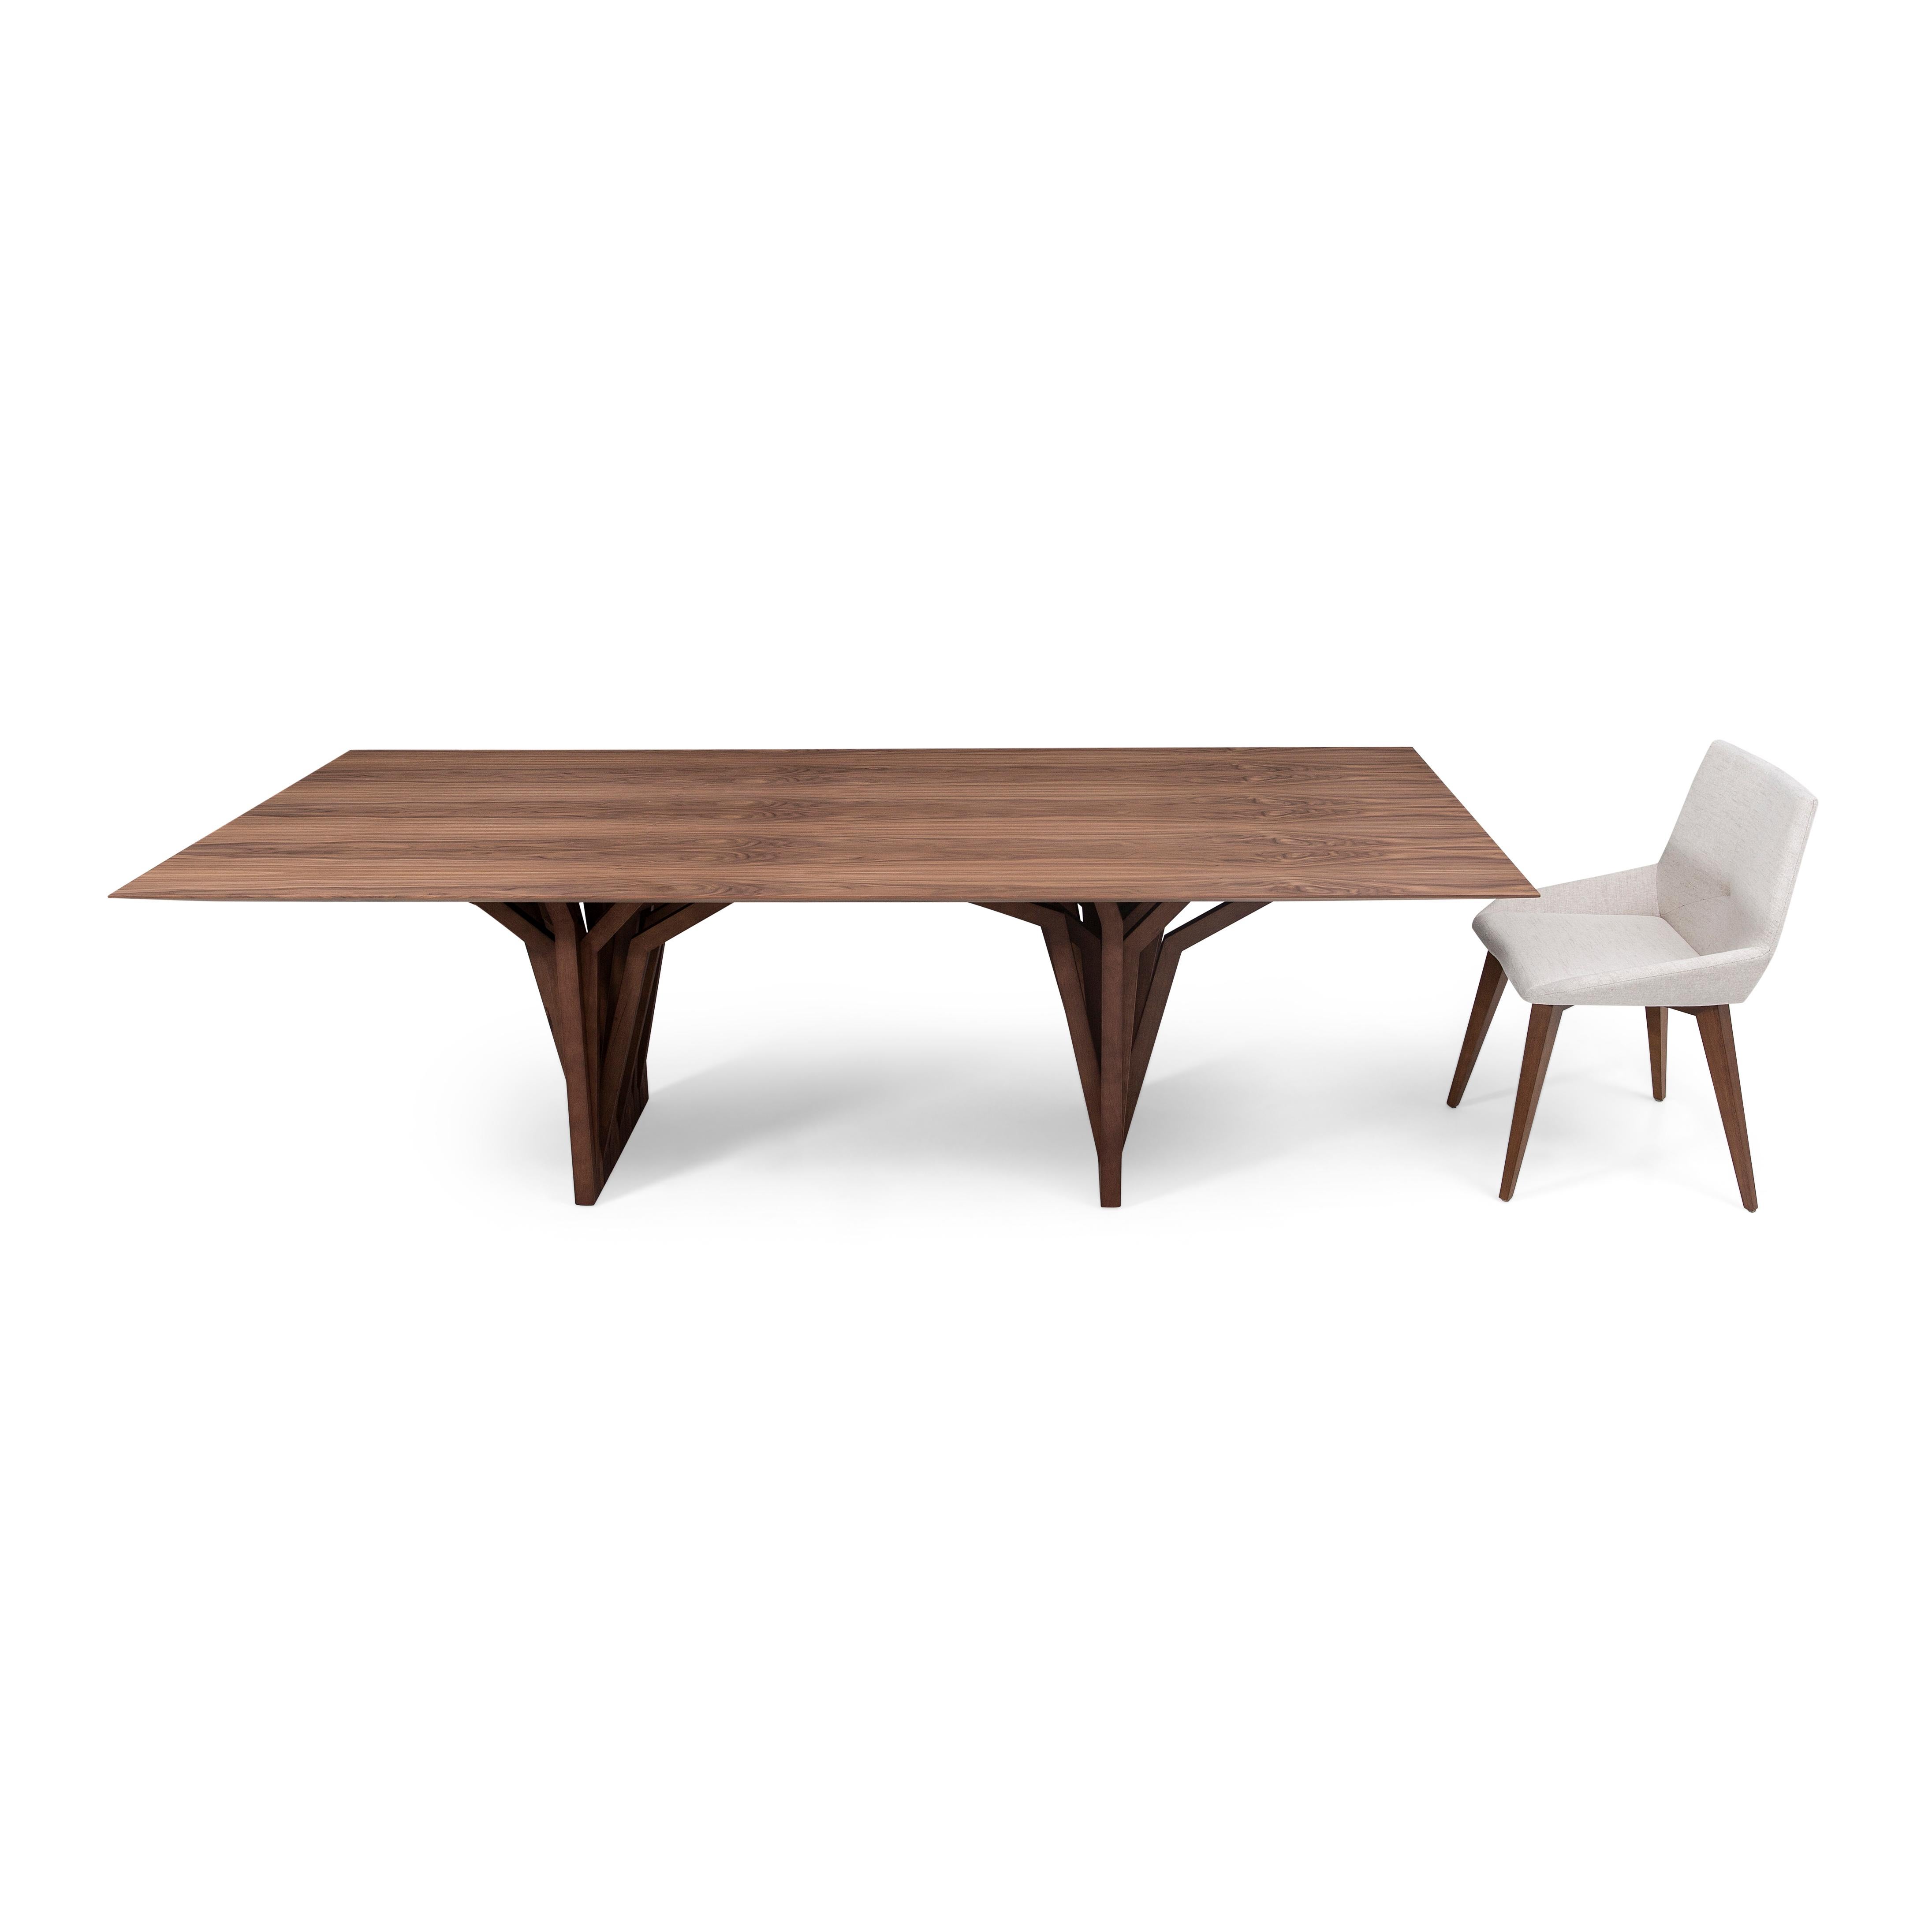 Contemporary Radi Dining Table with a Walnut Wood Veneered Table Top 98'' For Sale